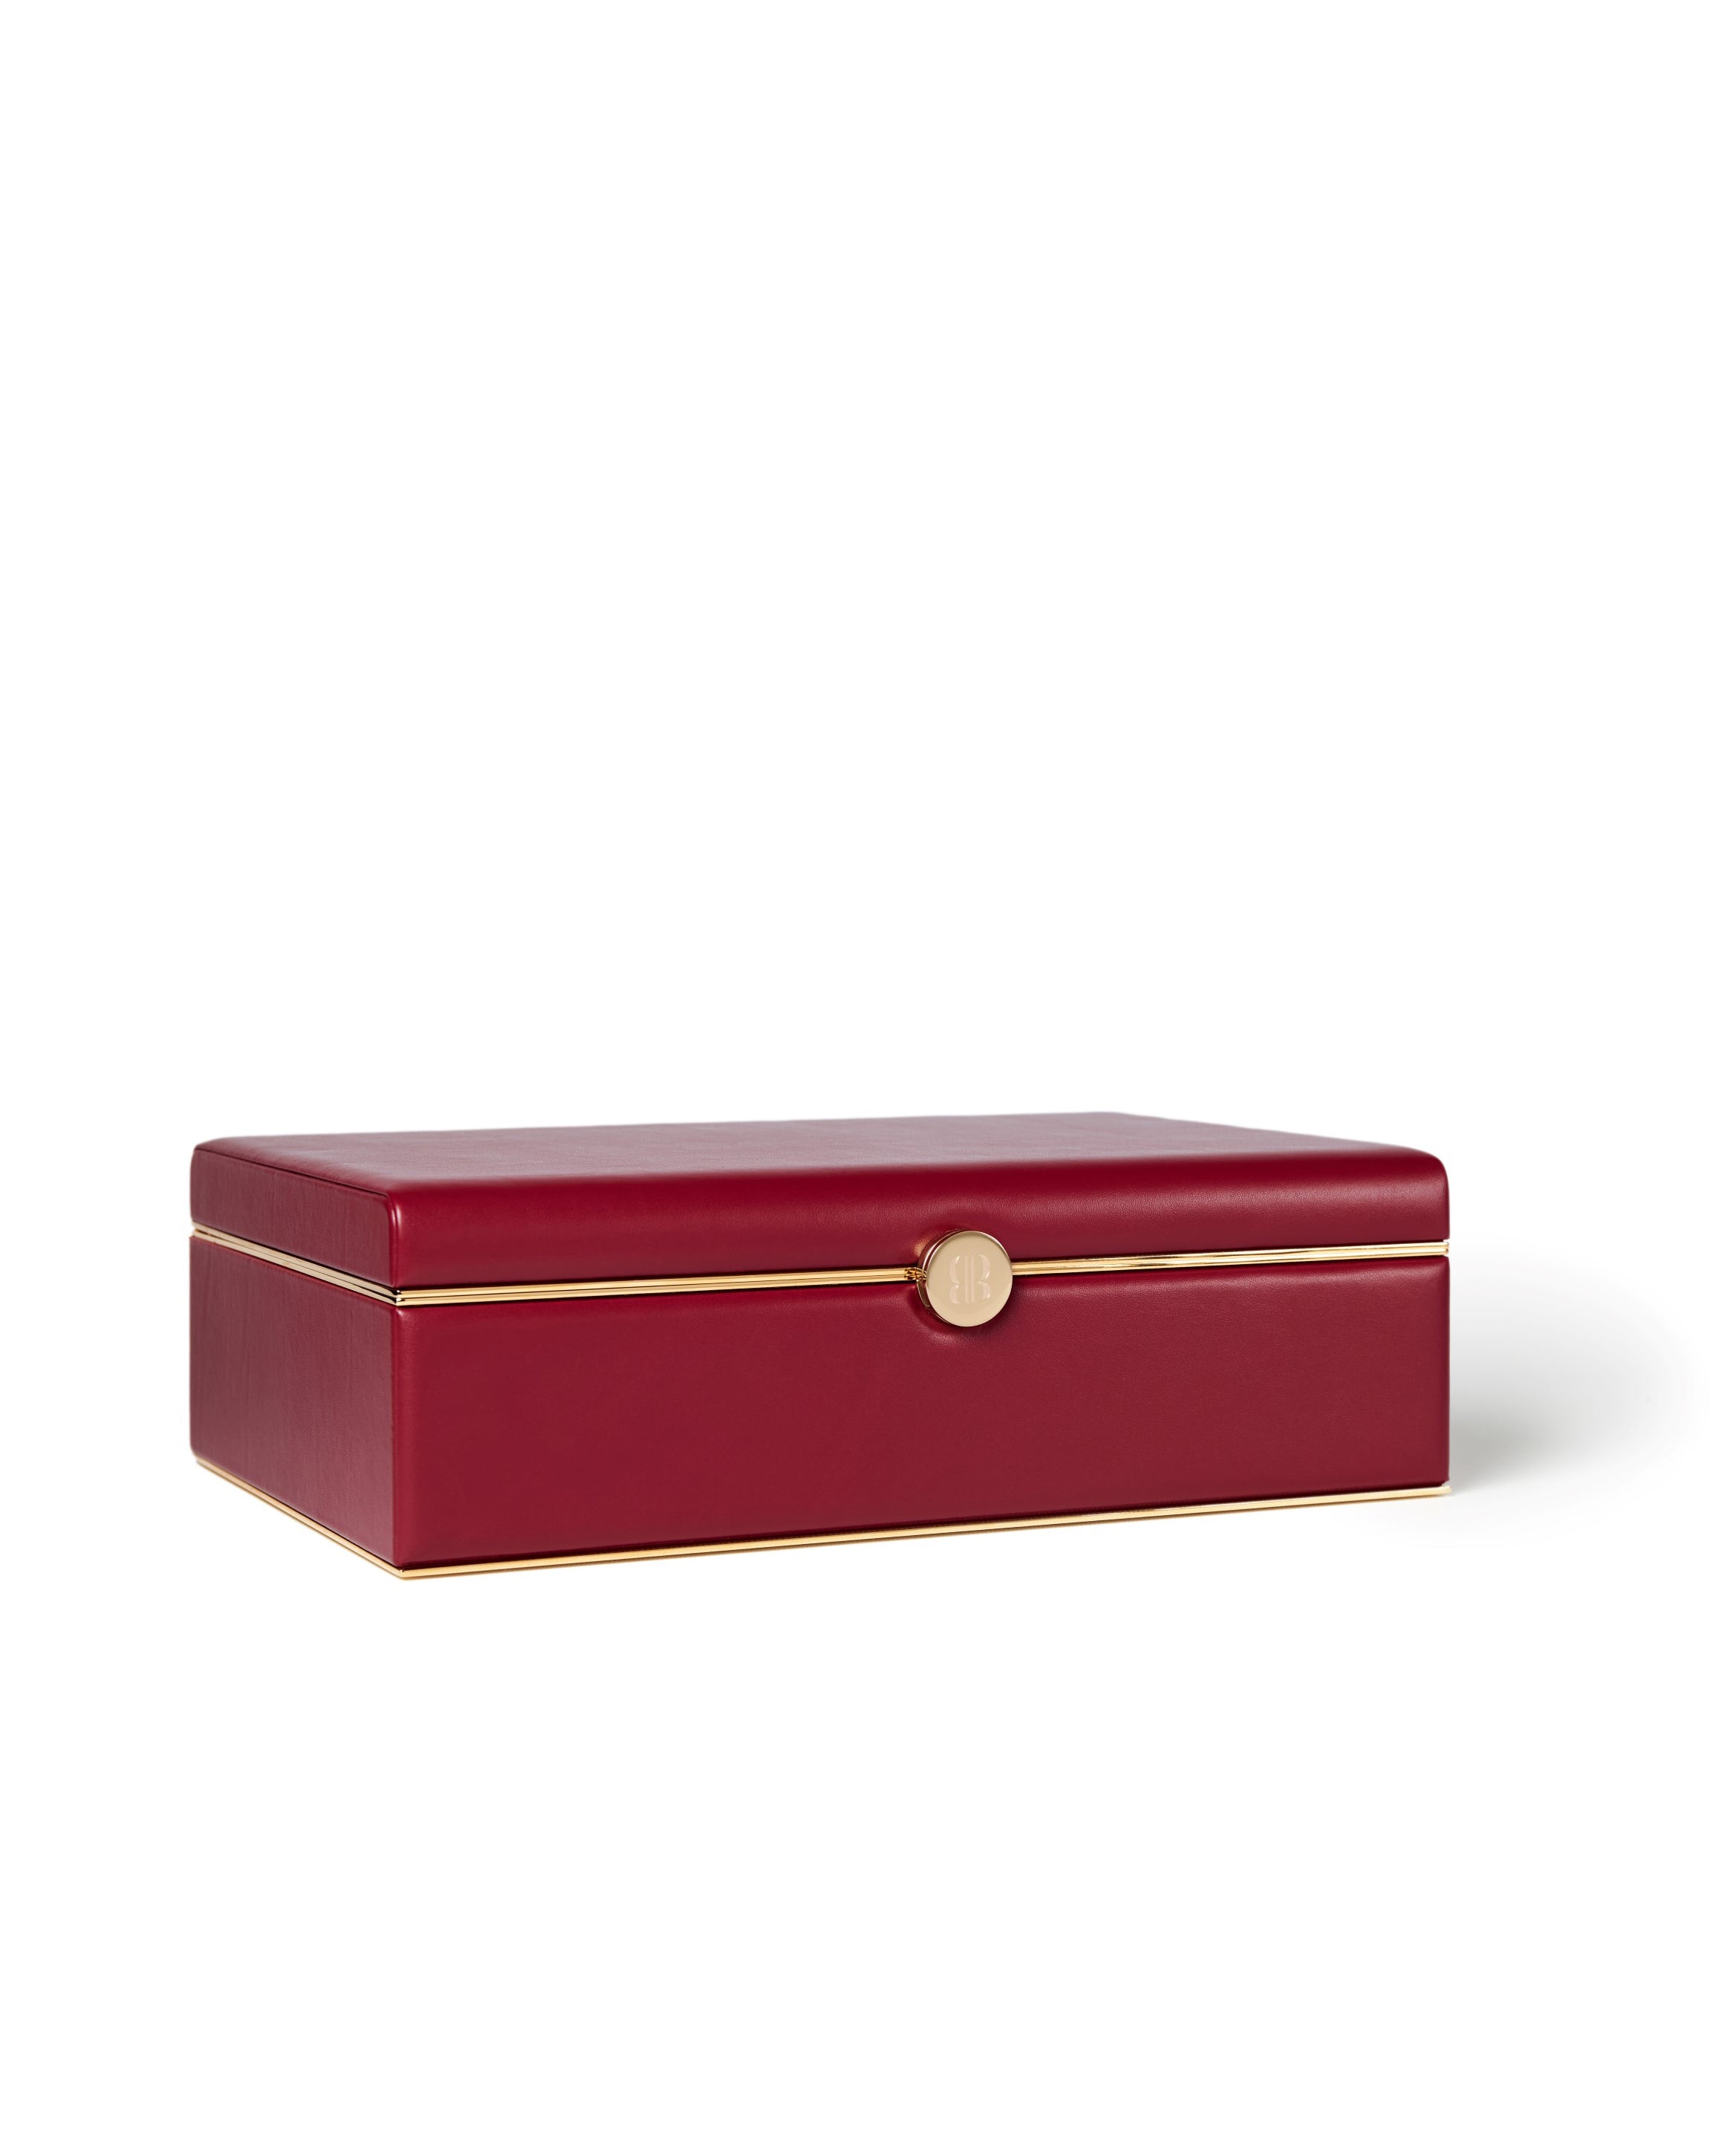 Bernardini Milano jewellery holder of red leather, yellow gold plated and silk - closed